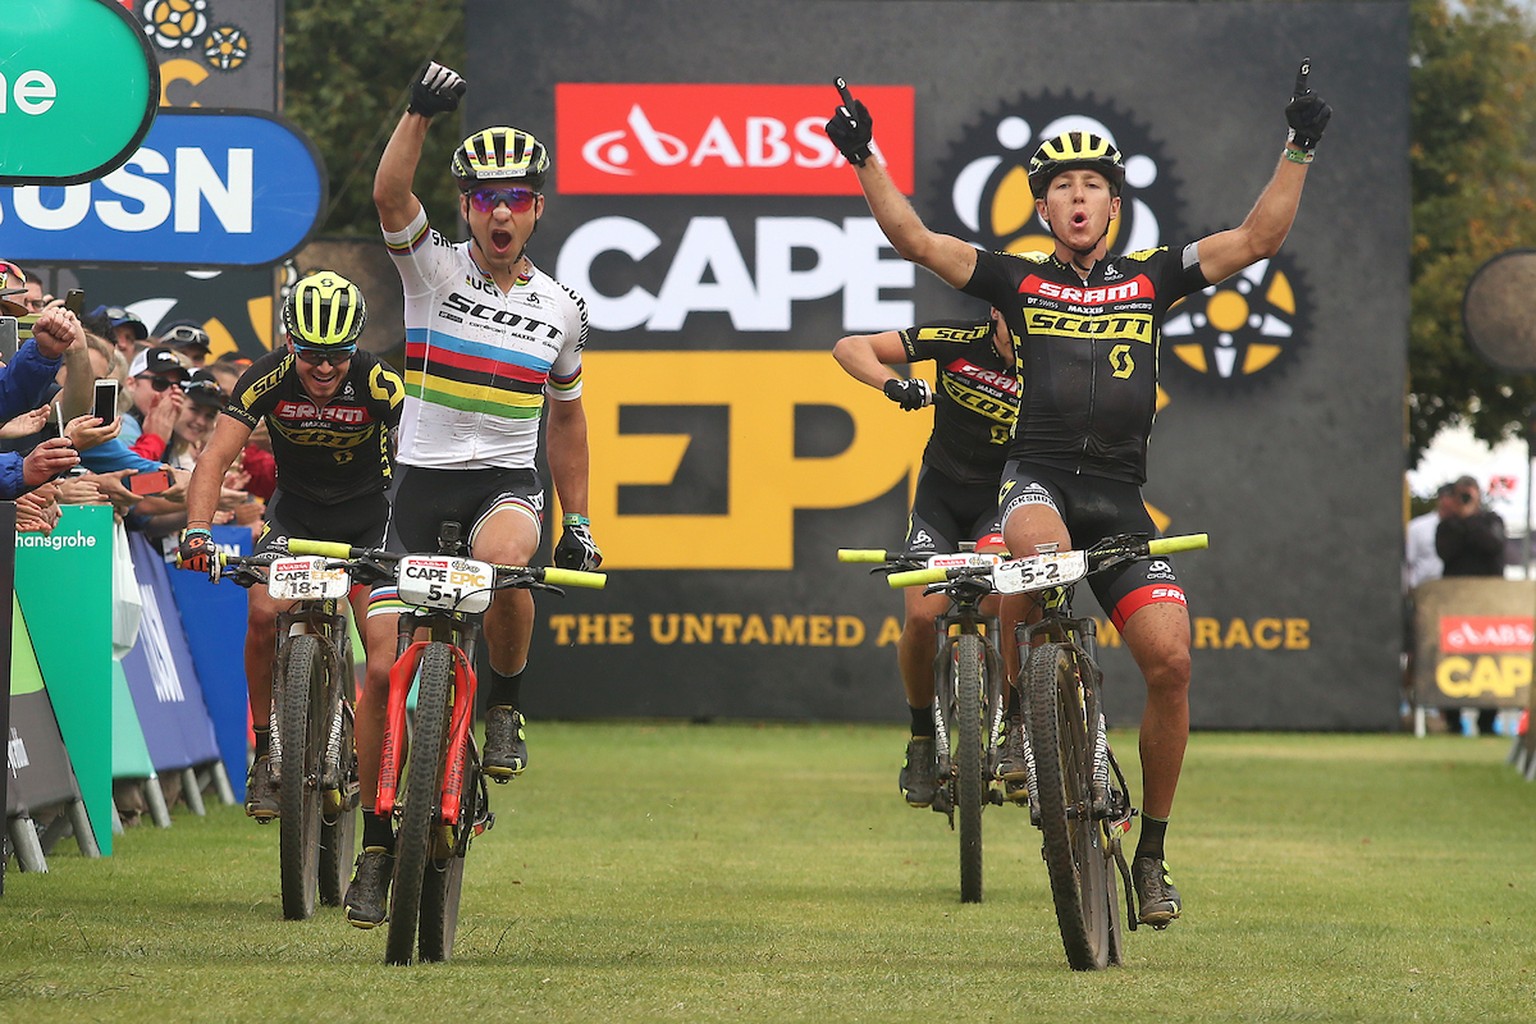 Nino Schurter &amp; Matthias Stirnemann of SCOTT-SRAM MTB Racing celebrate winning stage 5 &amp; taking the Overall lead during stage 5 of the 2017 Absa Cape Epic Mountain Bike stage race held from Oa ...